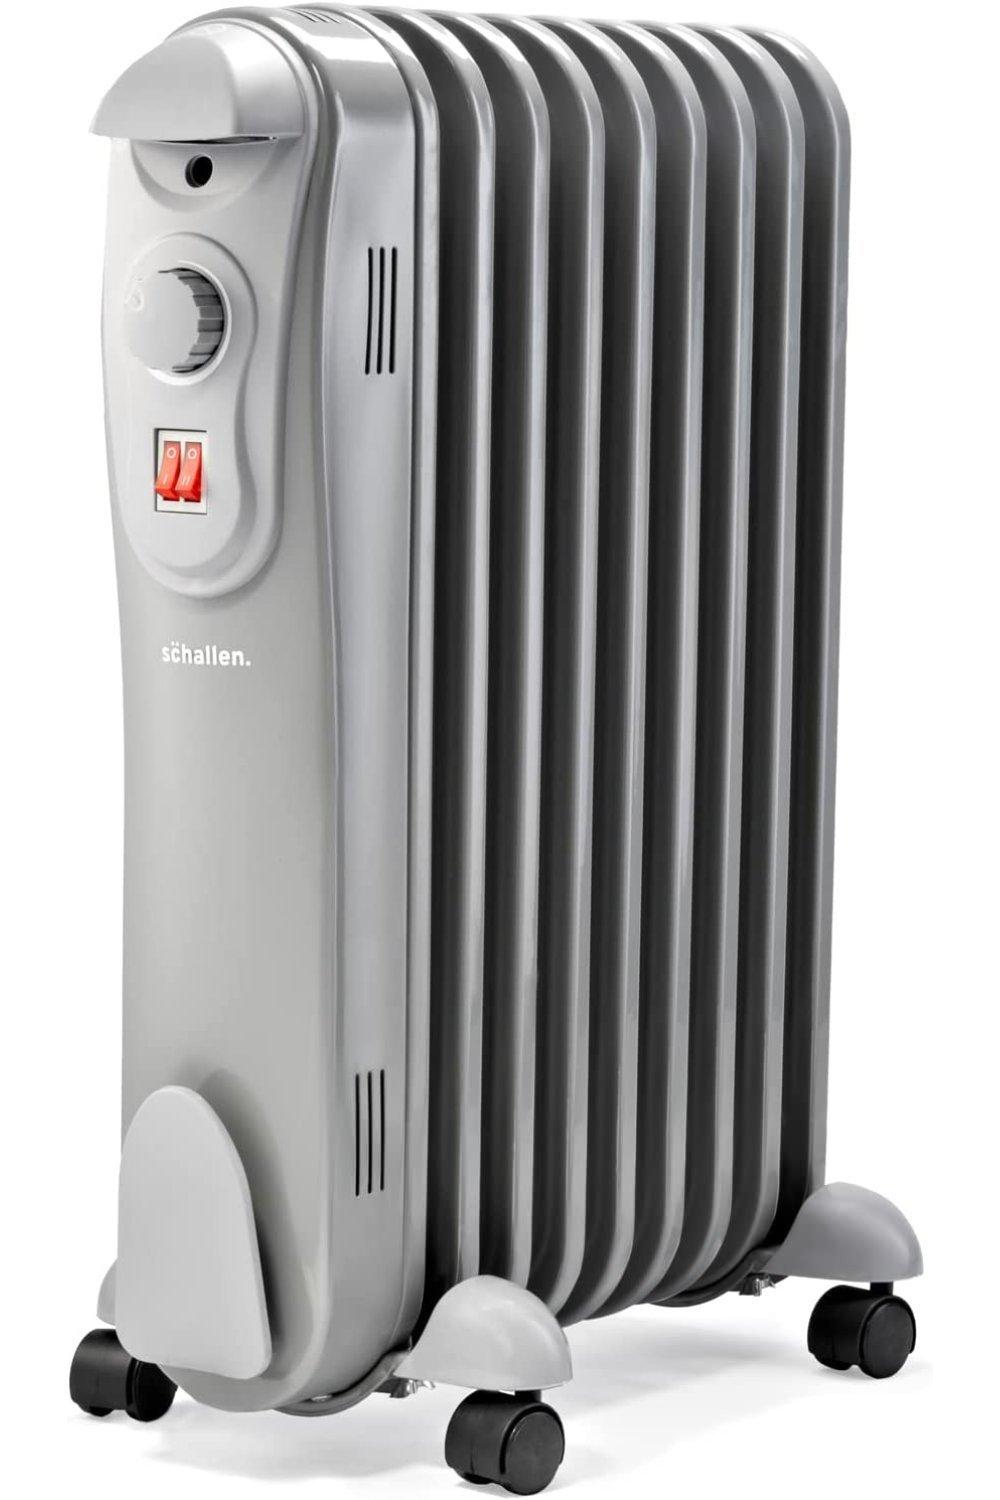 2000W 9 Fin Portable Electric Slim Oil Filled Radiator Heater with Adjustable Temperature Thermostat- Grey